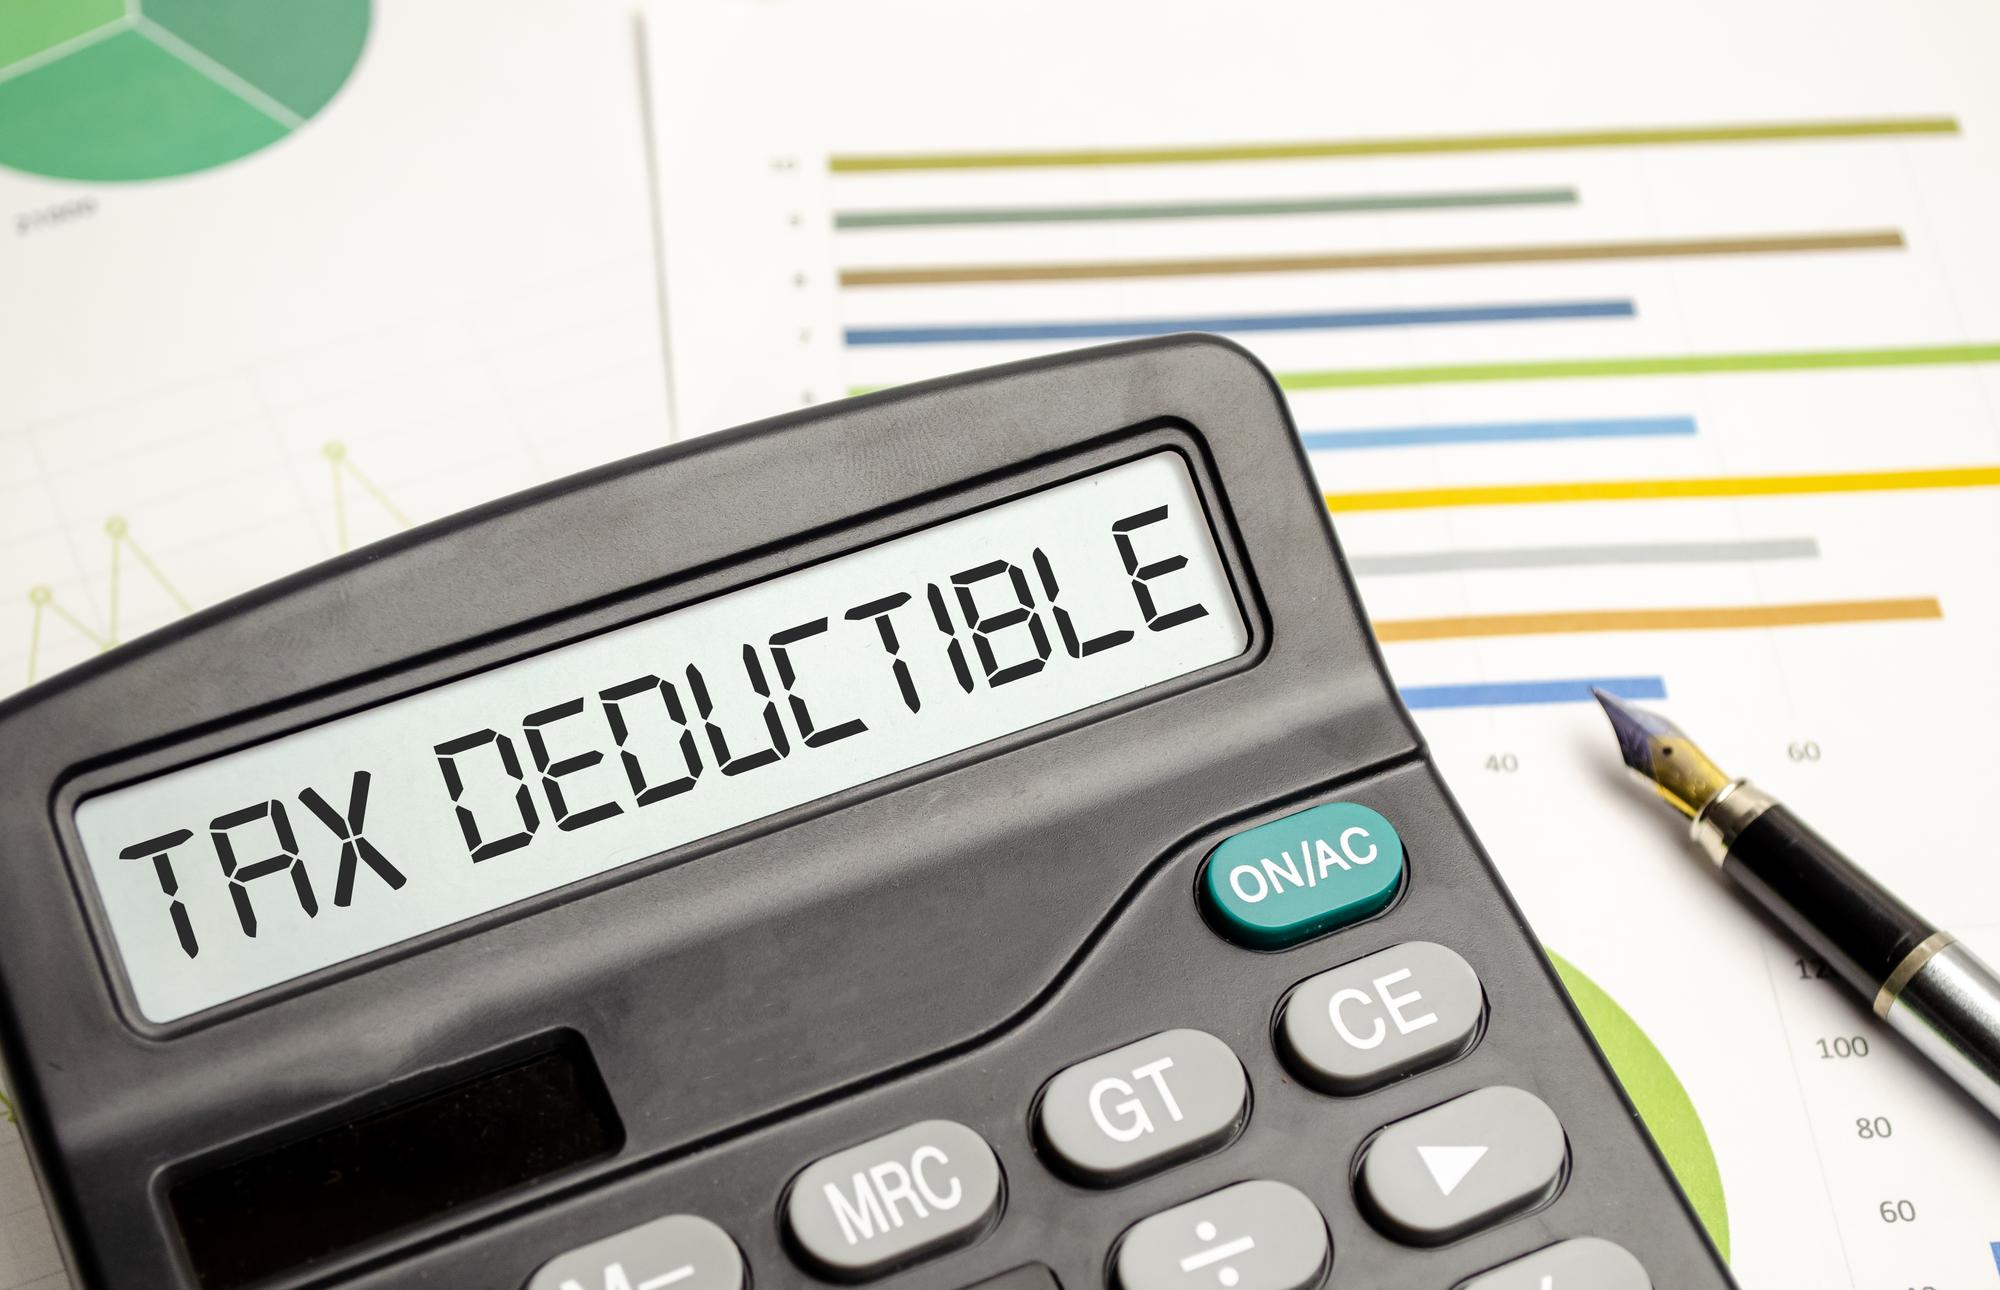 Tax deductible calculator on a desk: A device used to calculate tax deductions, placed on a desk for easy access and convenience.